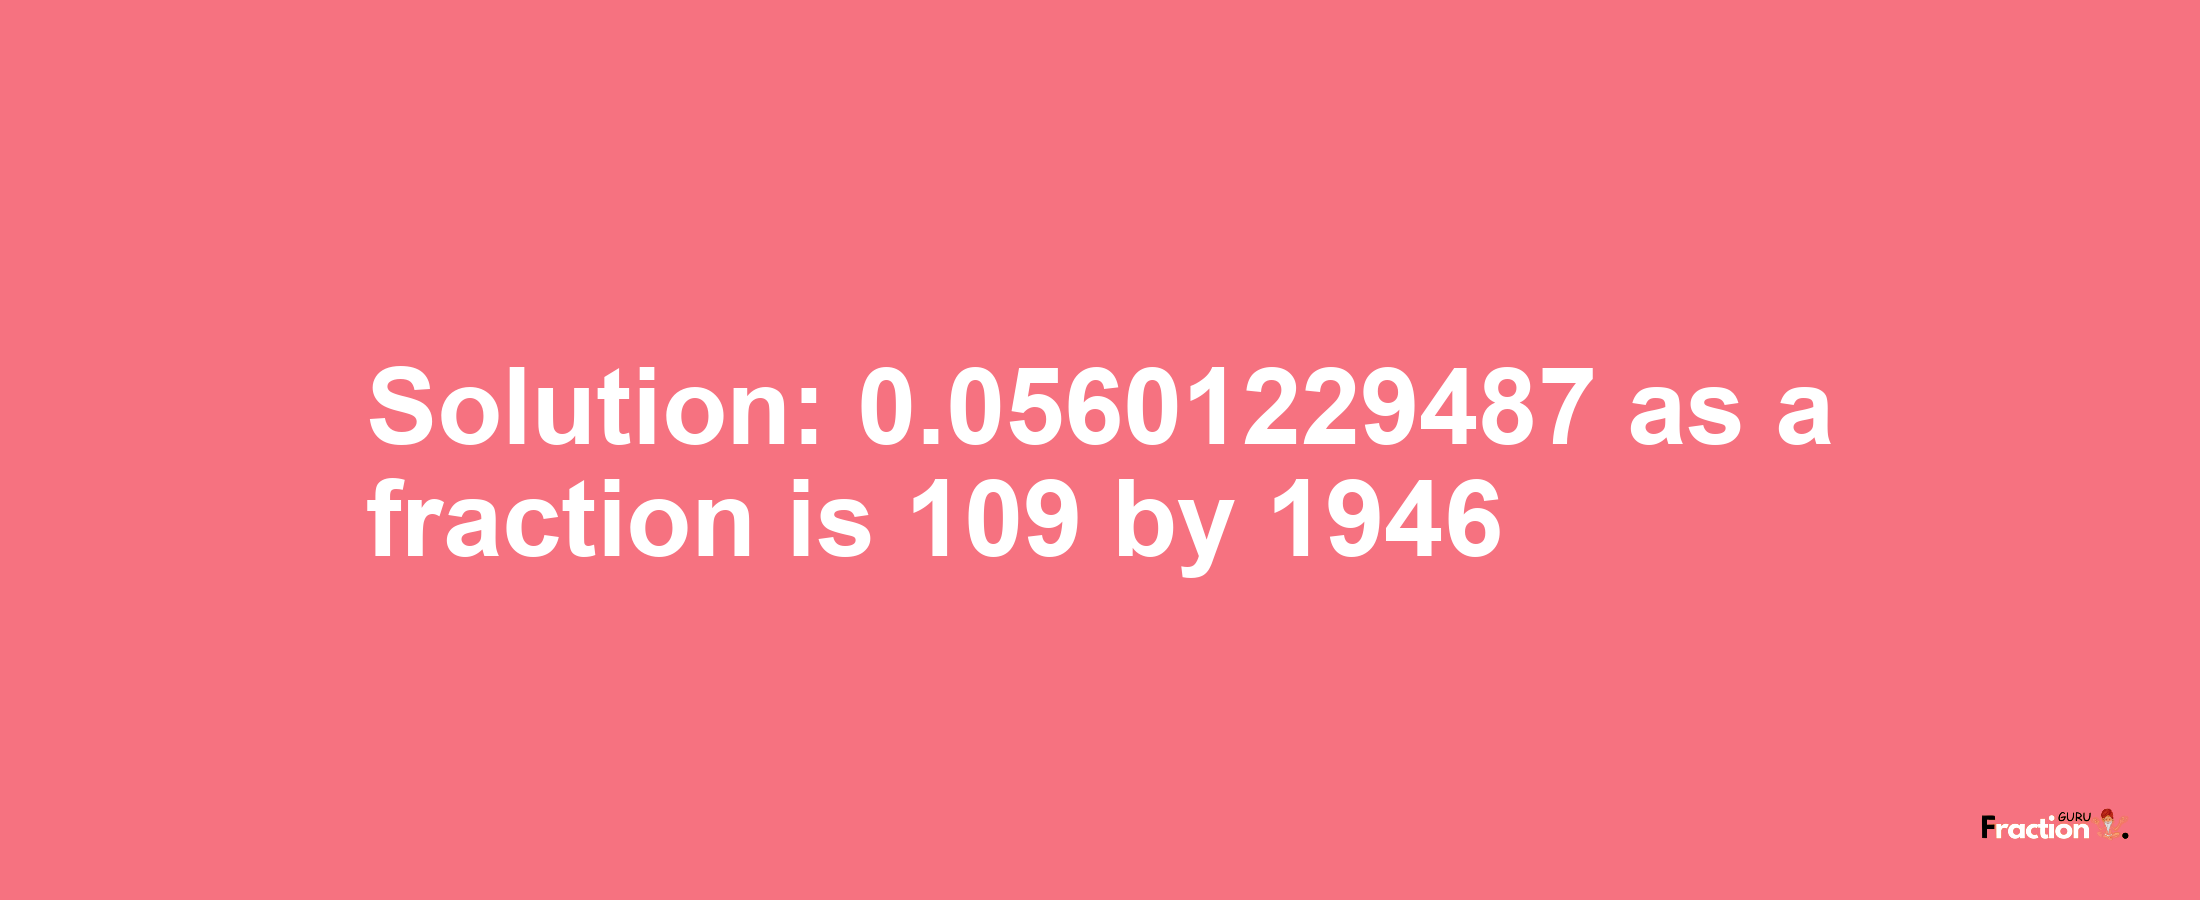 Solution:0.05601229487 as a fraction is 109/1946